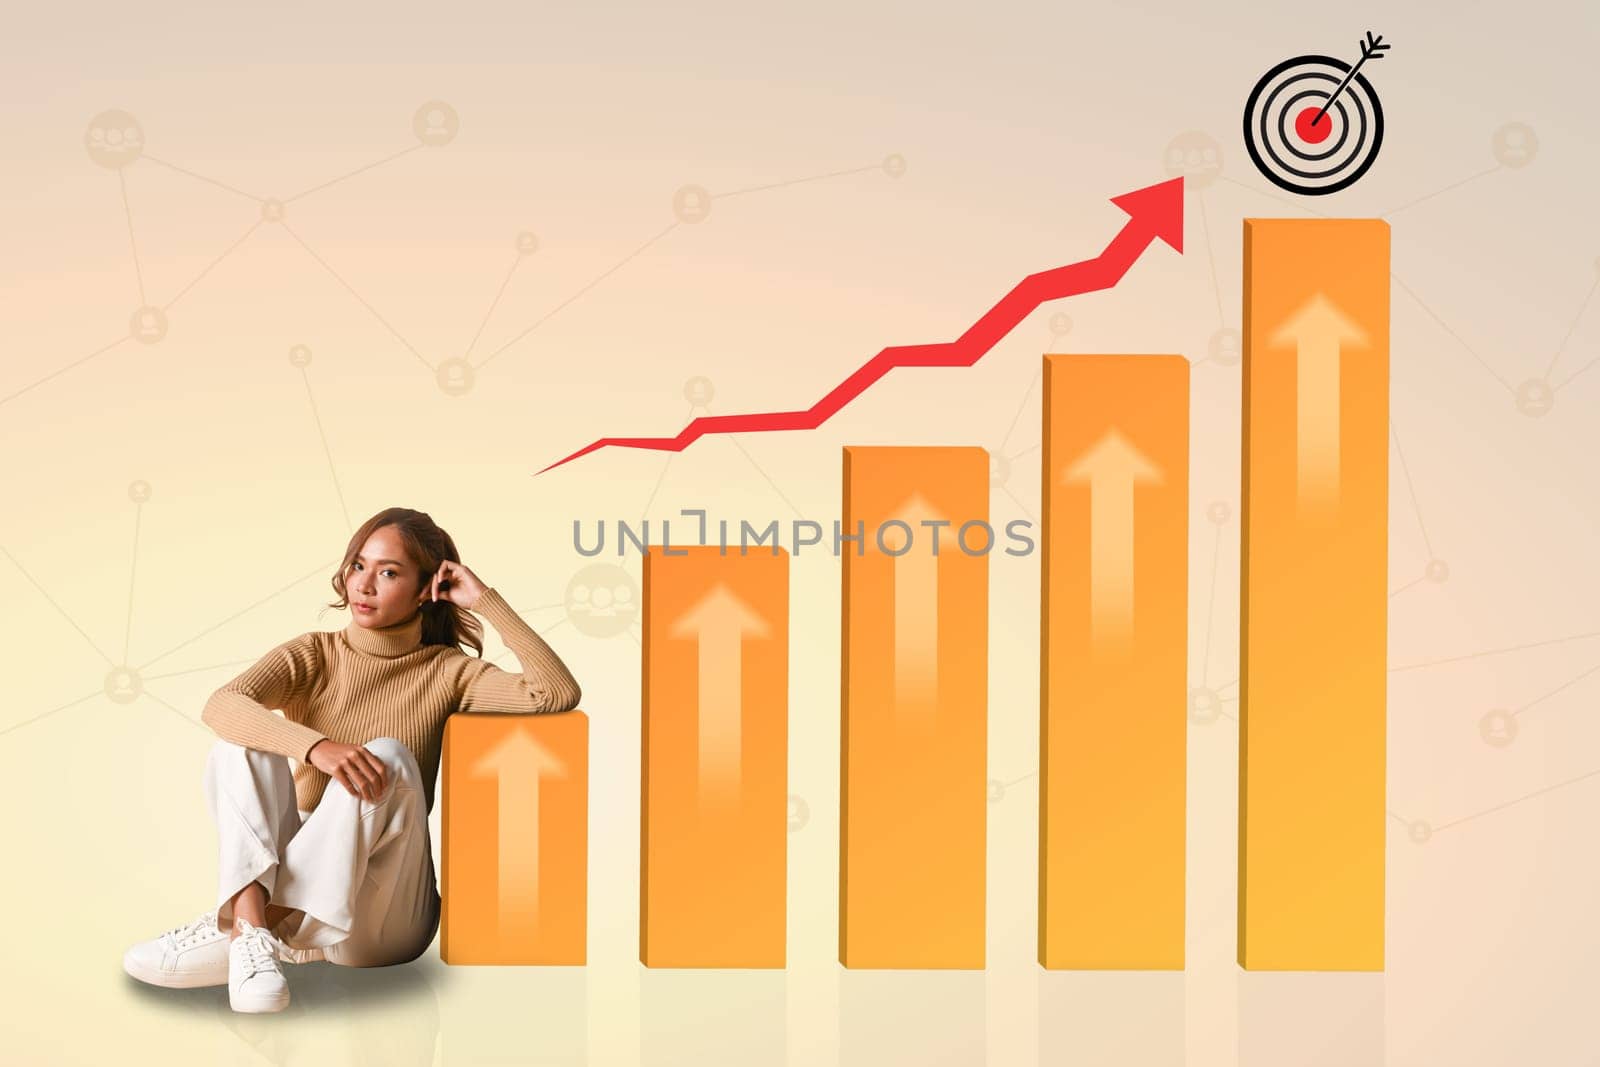 Creative banner poster of young business lady sitting near increasing graph. Finish goal and achievement concept by prathanchorruangsak